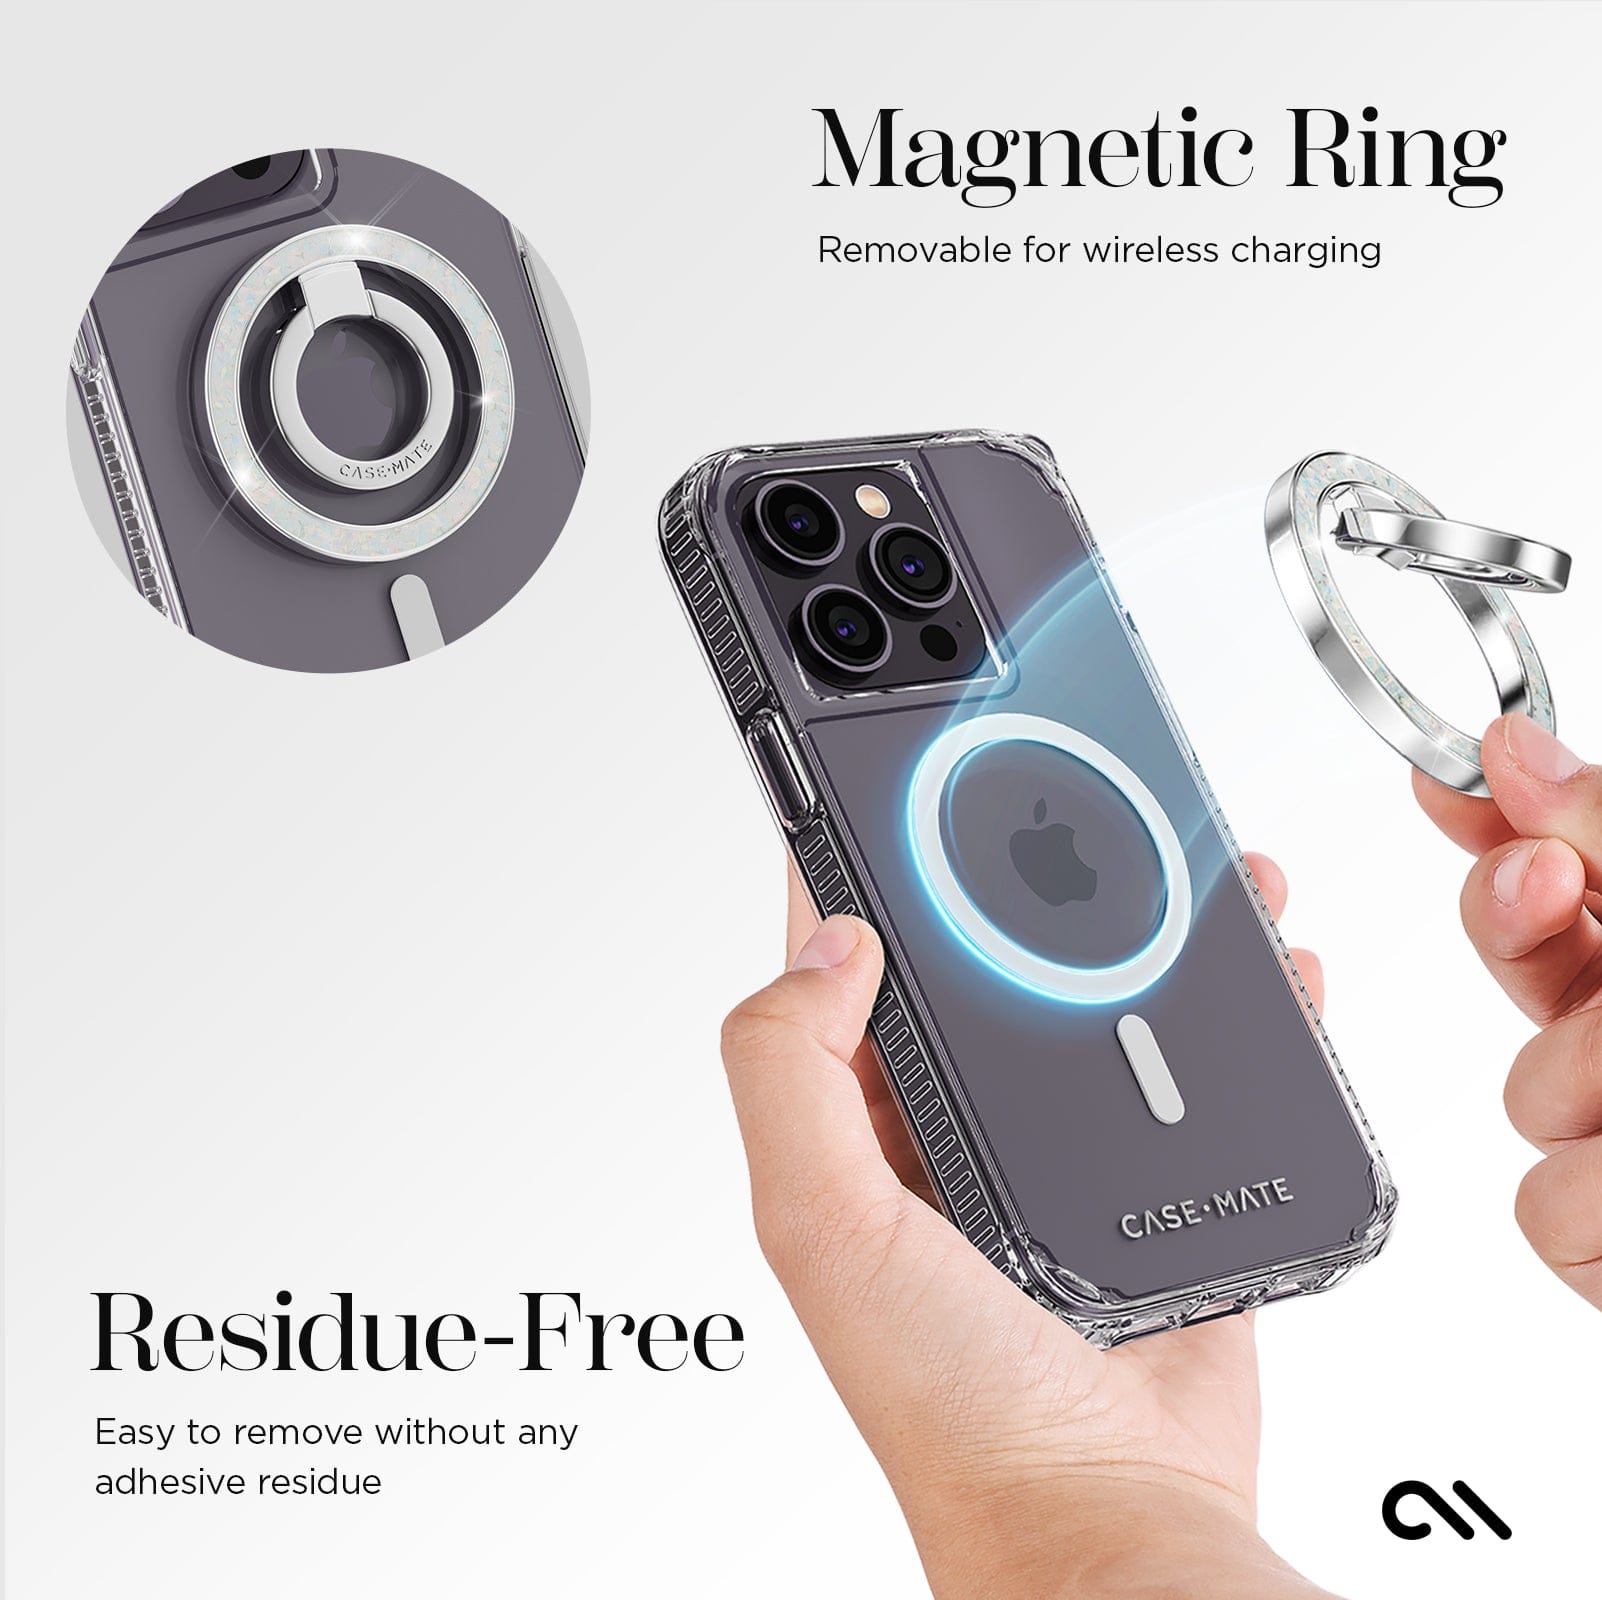 MAGNETIC RING. REMOVABLE FOR WIRELESS CHARGING. RESIDUE-FREE EASY TO REMOVE WITHOUT ANY ADHESIVE RESIDUE. 